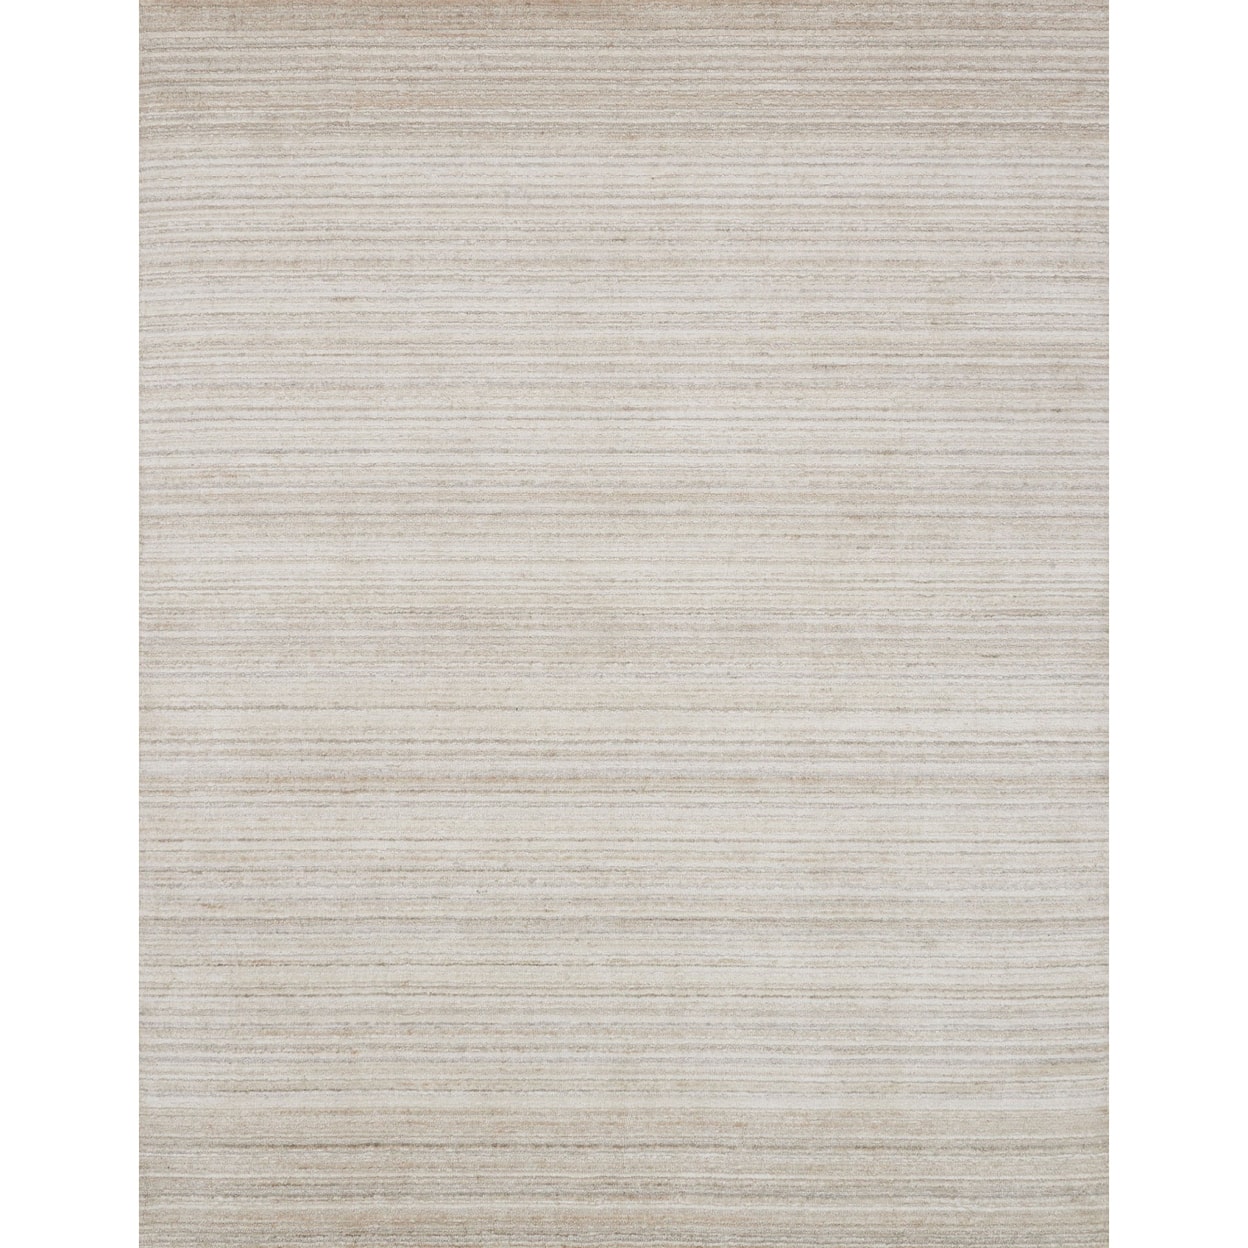 Reeds Rugs Haven 9'-6" x 13'-6" Area Rug